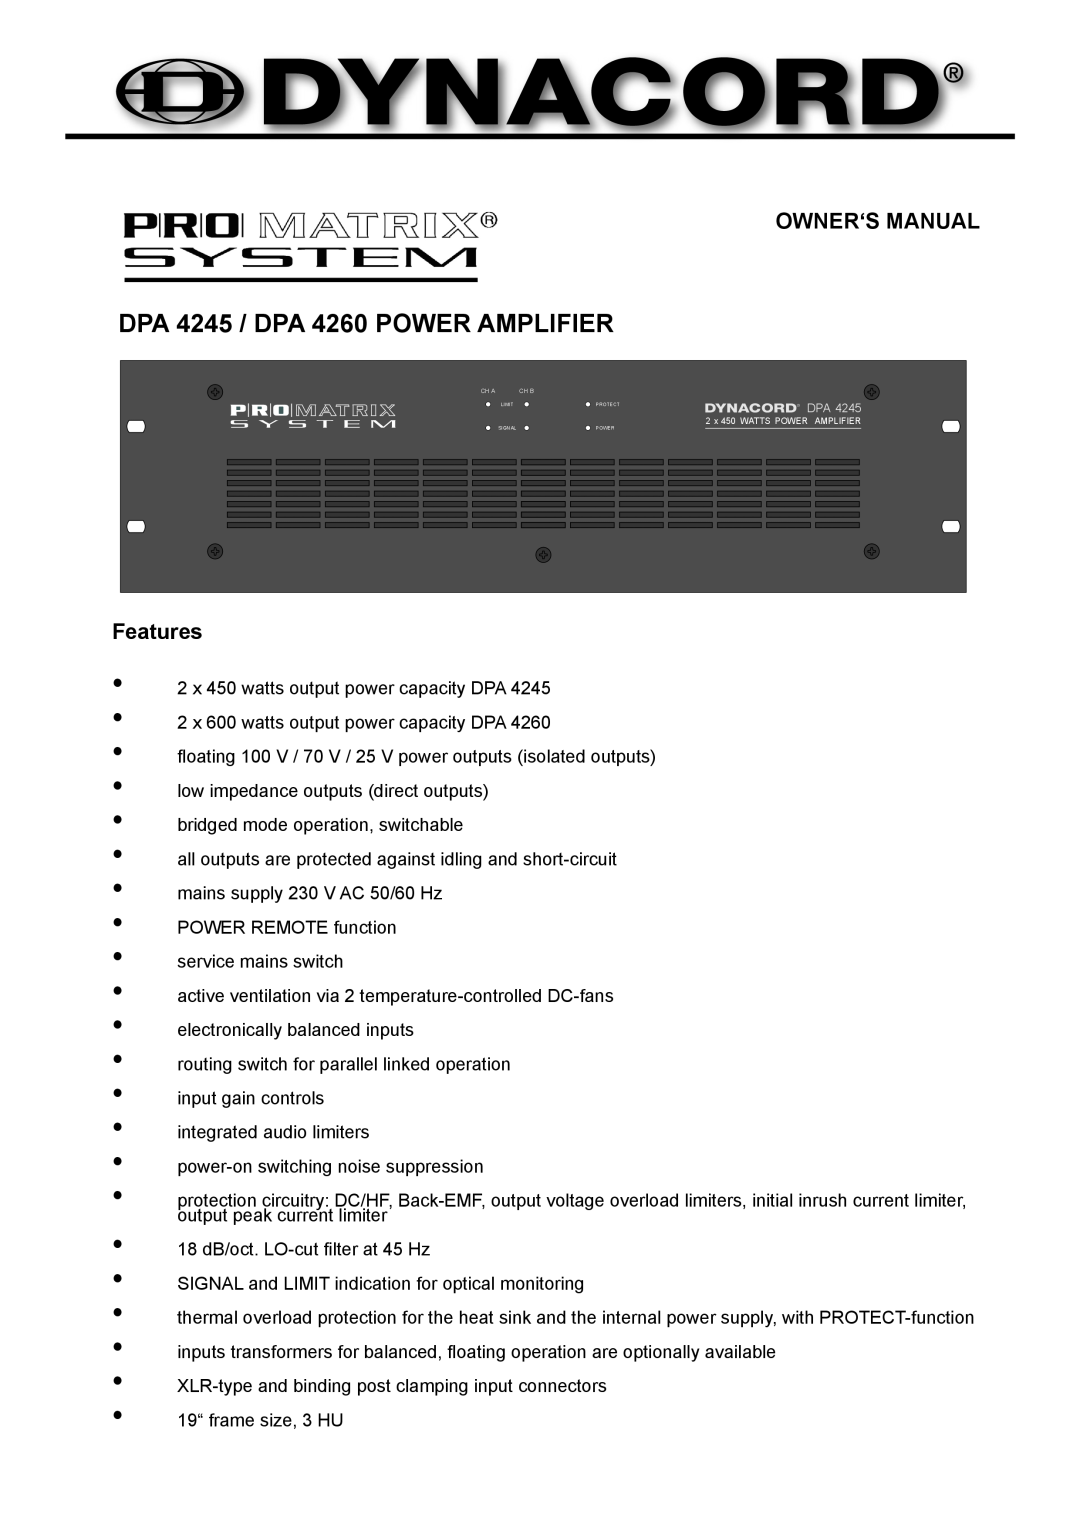 Dynacord owner manual Owner‘S Manual, Features, DPA 4245 / DPA 4260 POWER AMPLIFIER 